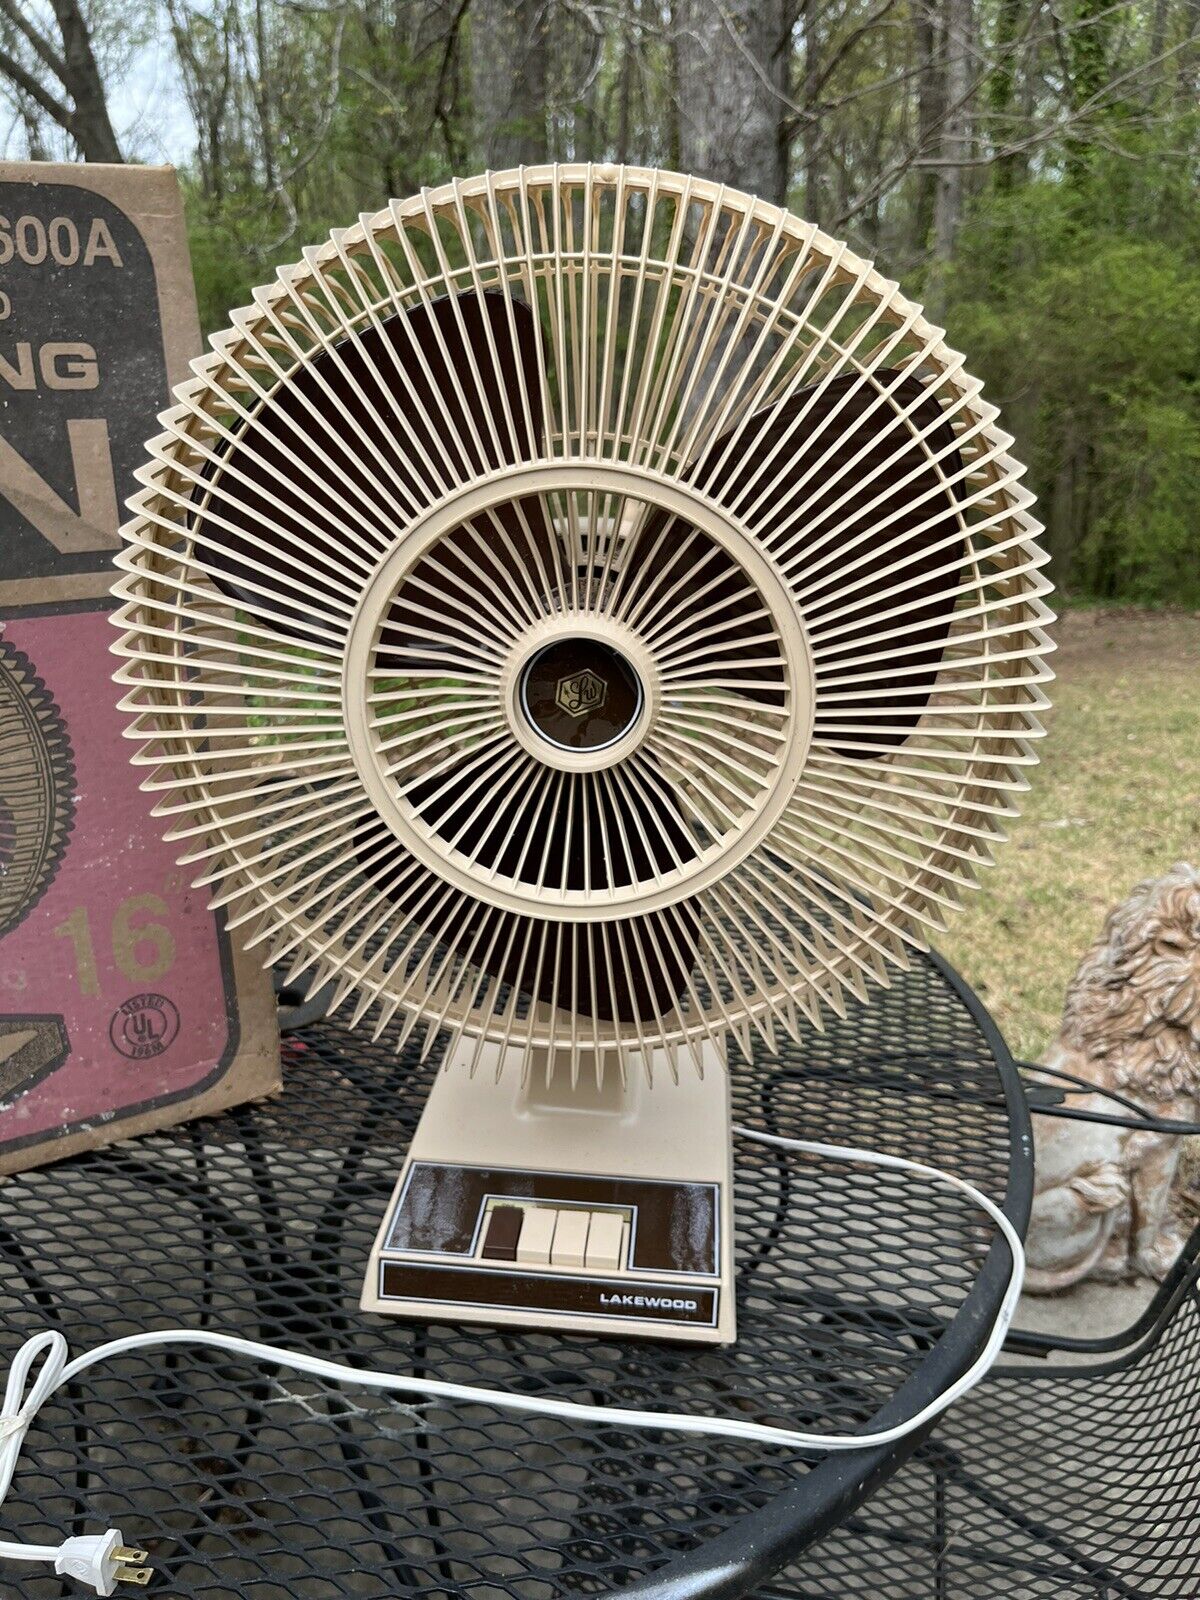 BRAND NEW OLD  STOCK IN BOX Lakewood 1500A Vintage Fan oscillating 1600A Box